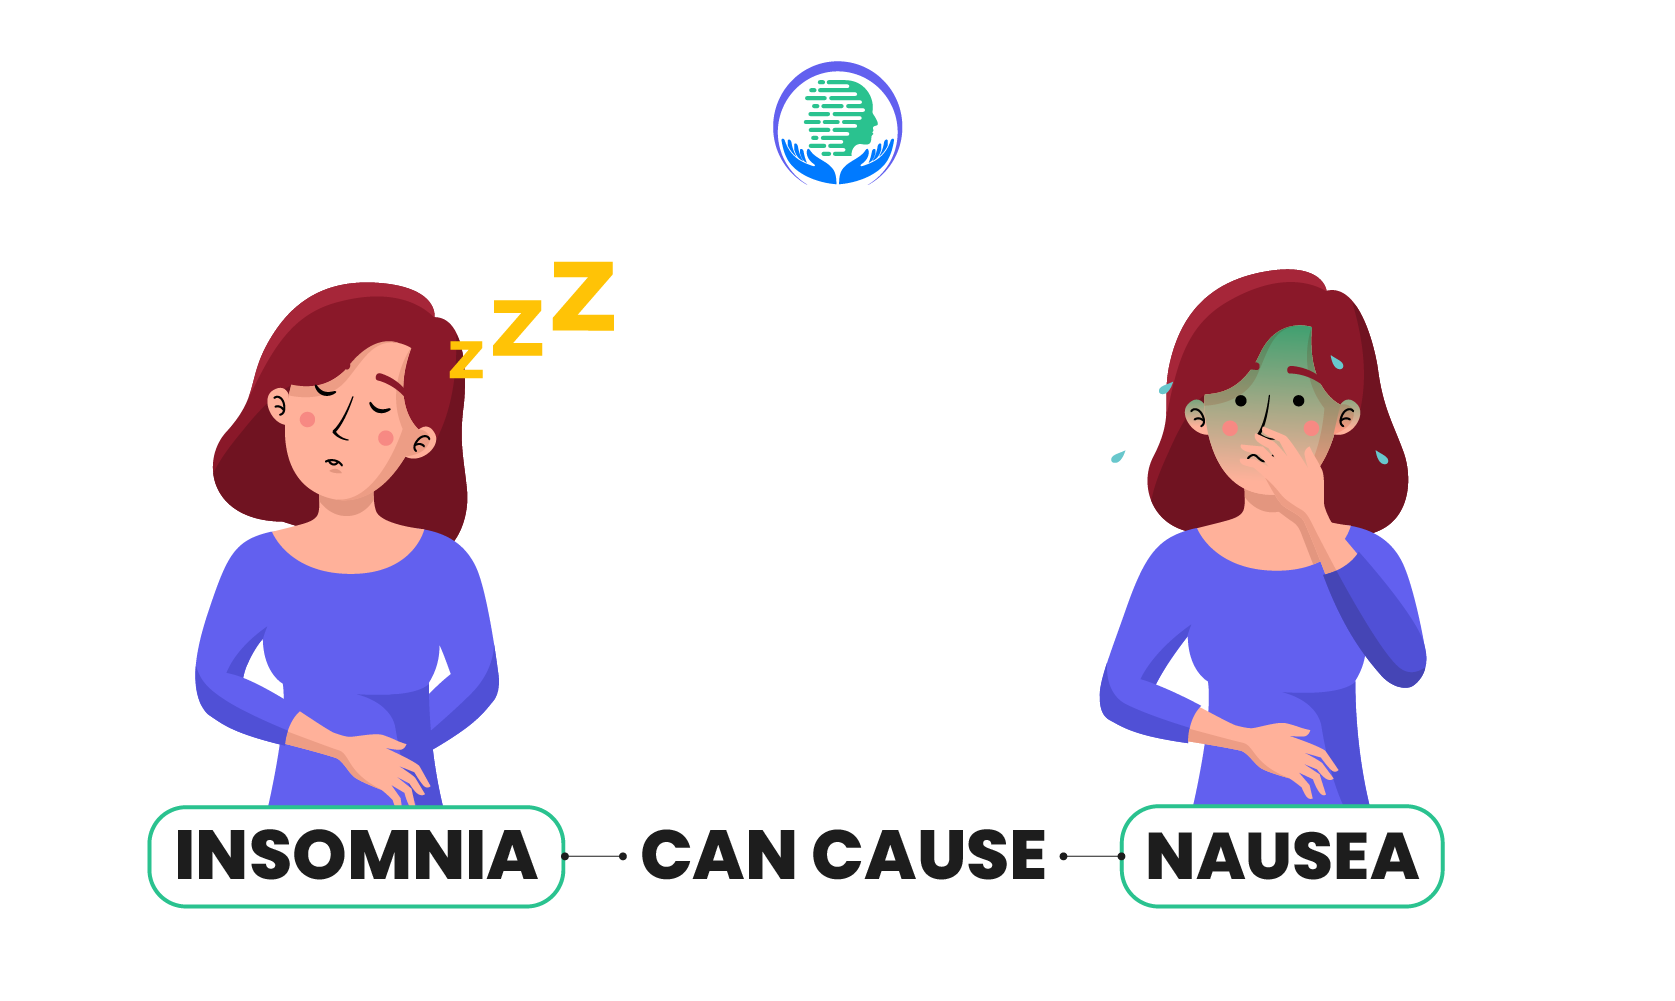 Insomnia can cause nausea